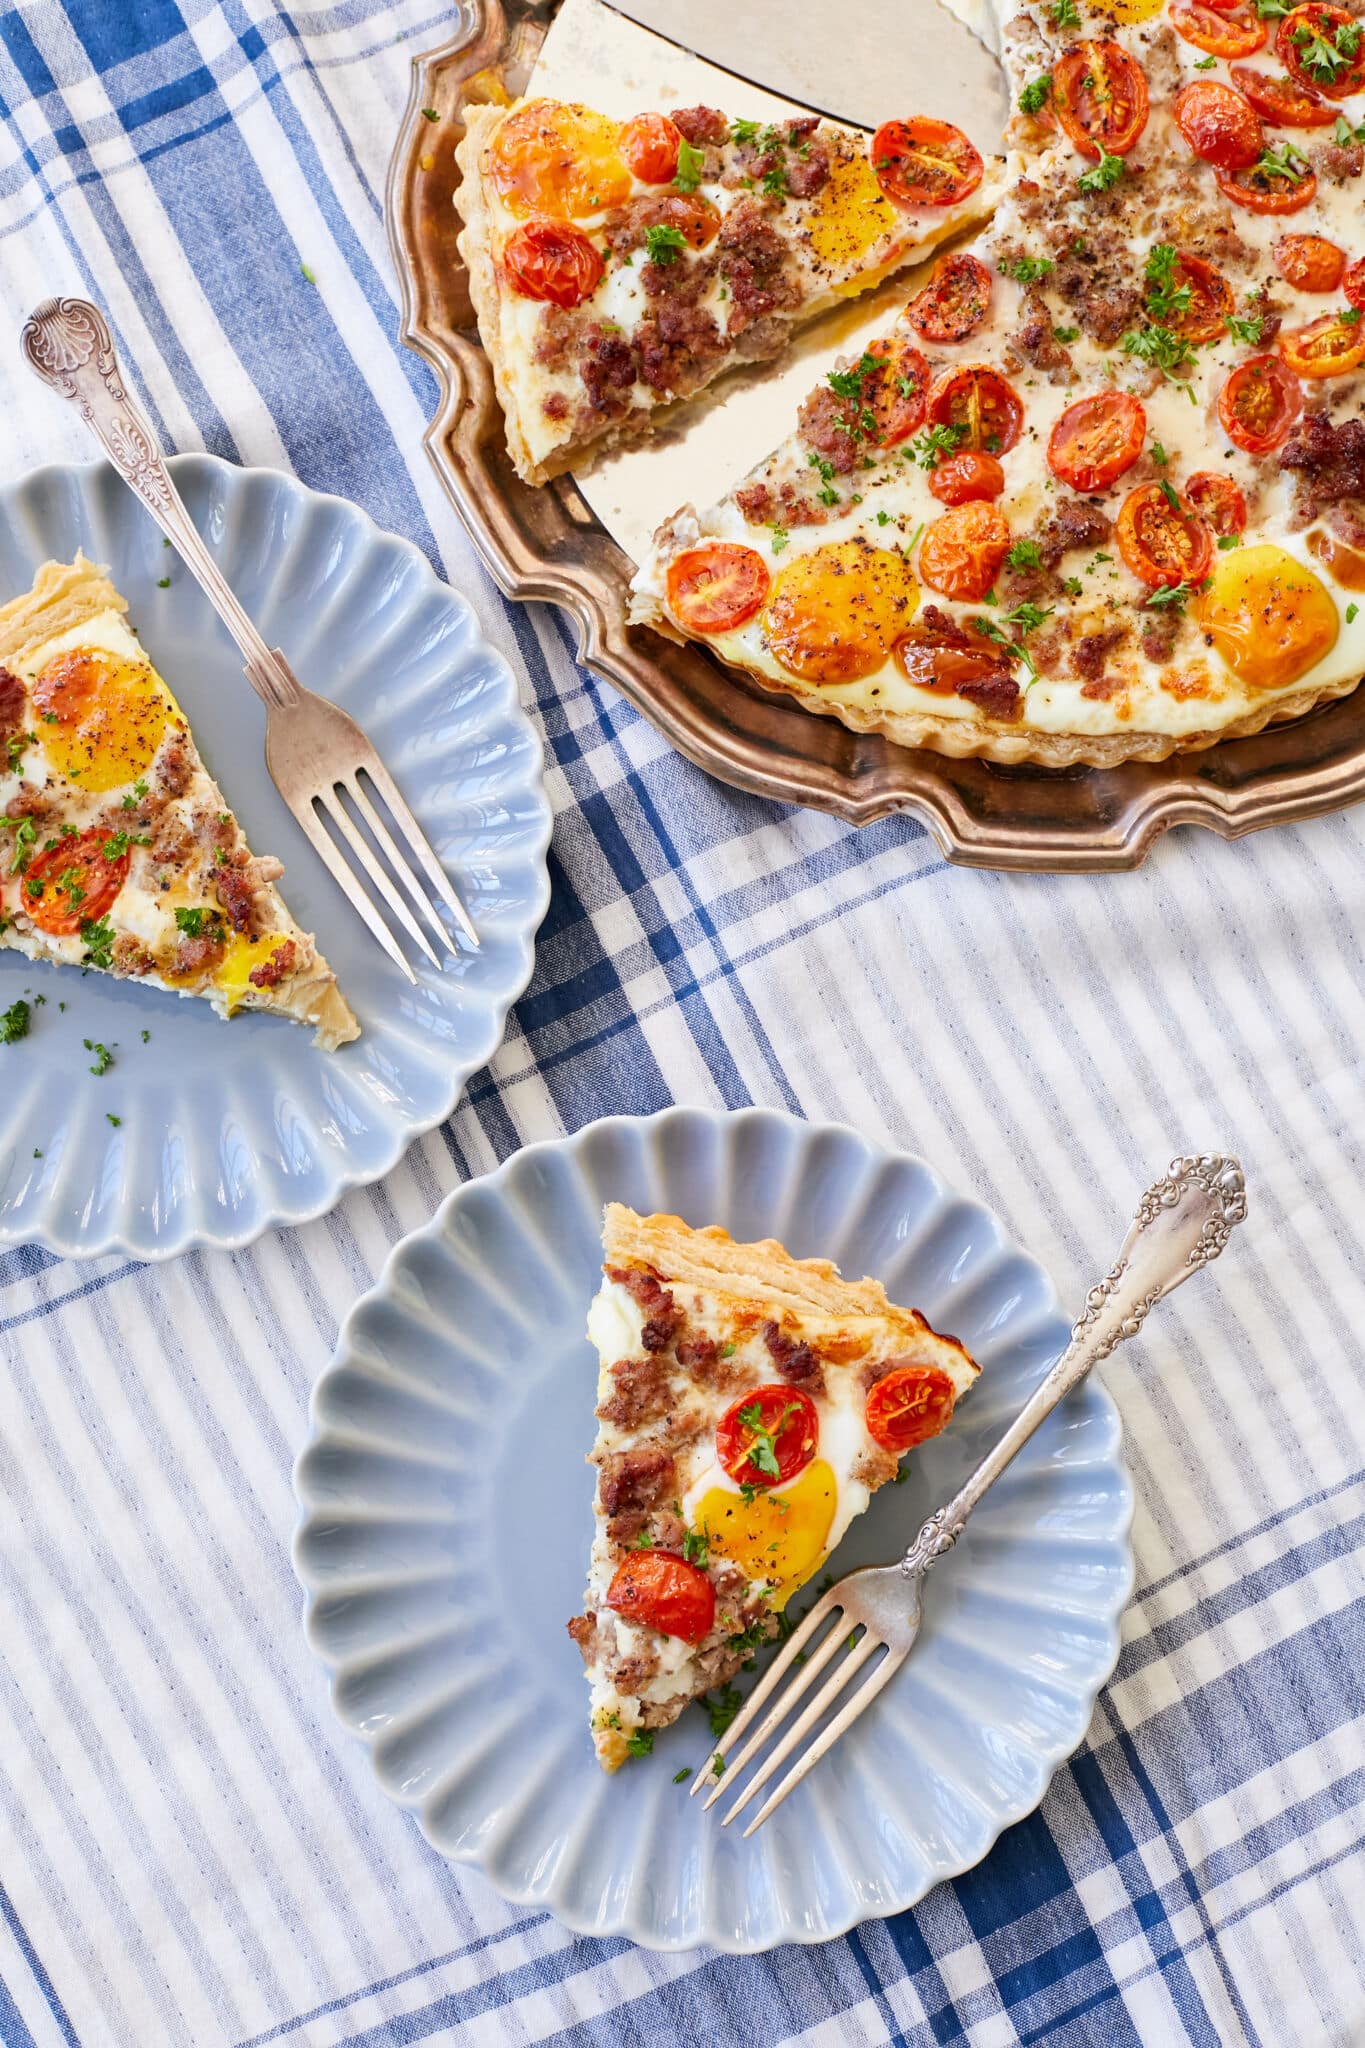 The Complete Breakfast Tart is placed and divided in a rose-gold platter. Two slices are served on two blue scalloped-edge plates with a fork on each. The tart has golden crust and is loaded with savory sausage, melted creamy cheese, bright red cherry tomatoes, eggs and topped with parsley.